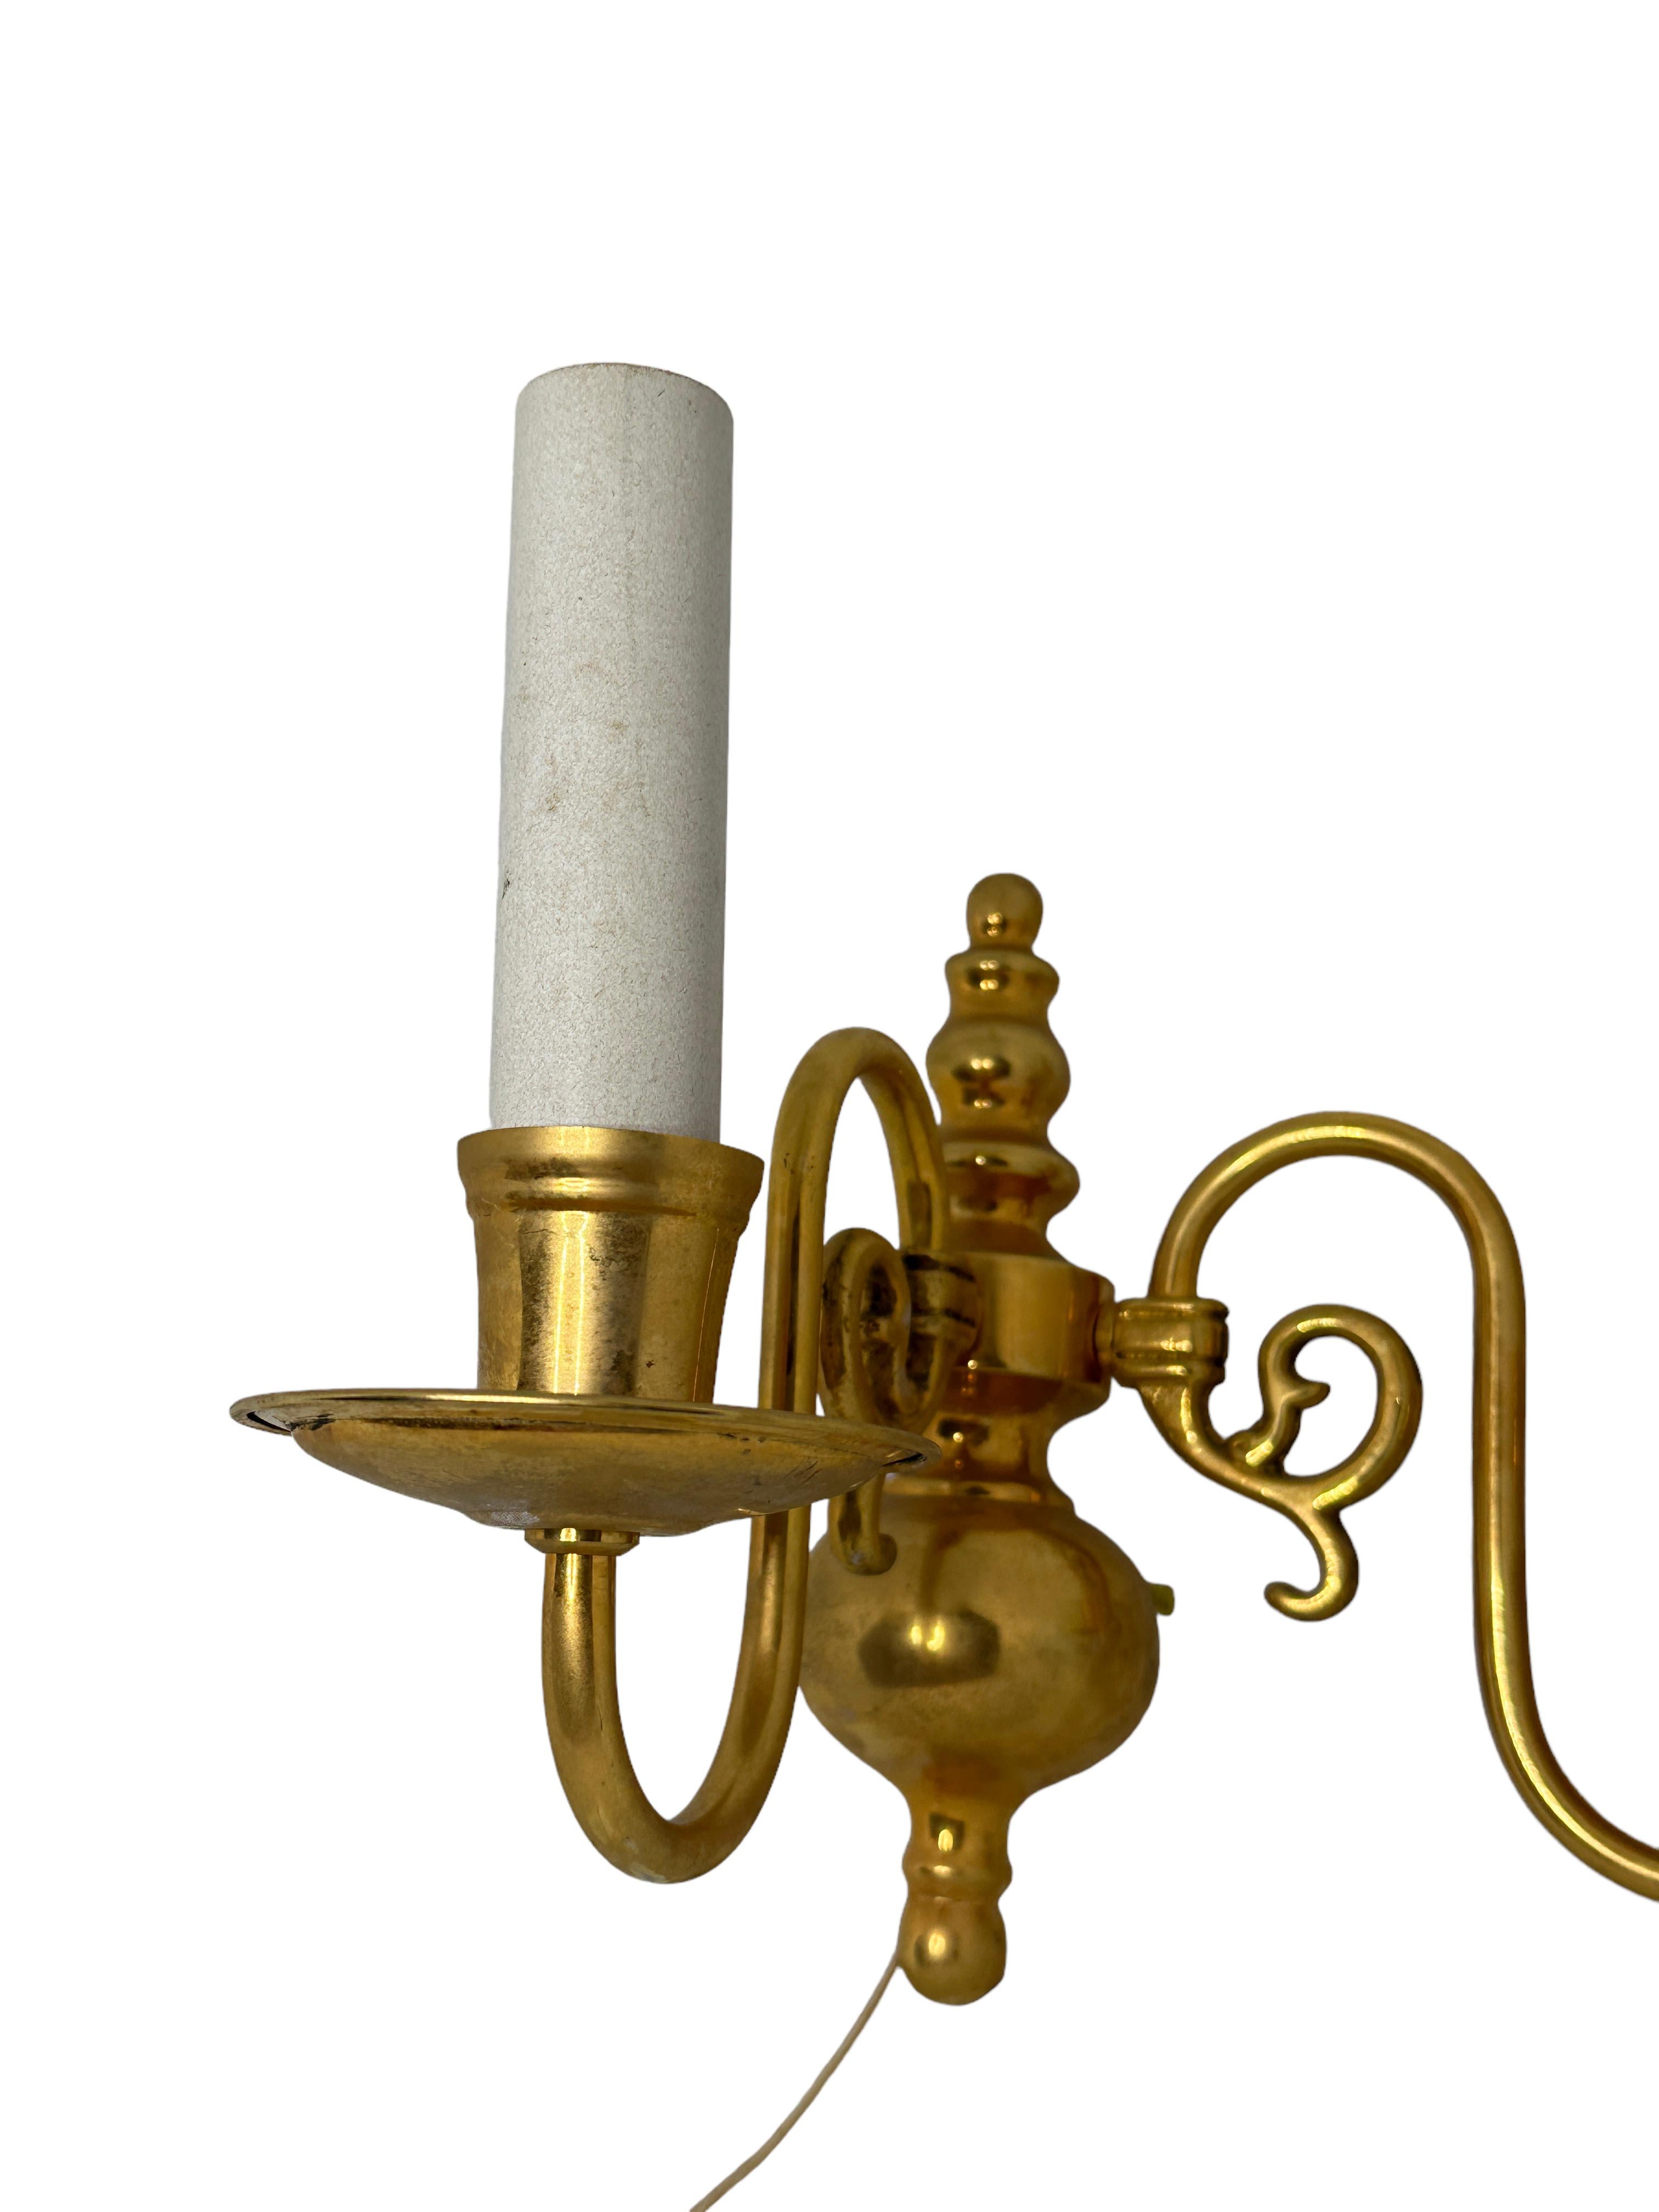 Metal Pair of Solid Brass Two-Light Wall Sconces, Vintage, Austria, 1950s For Sale